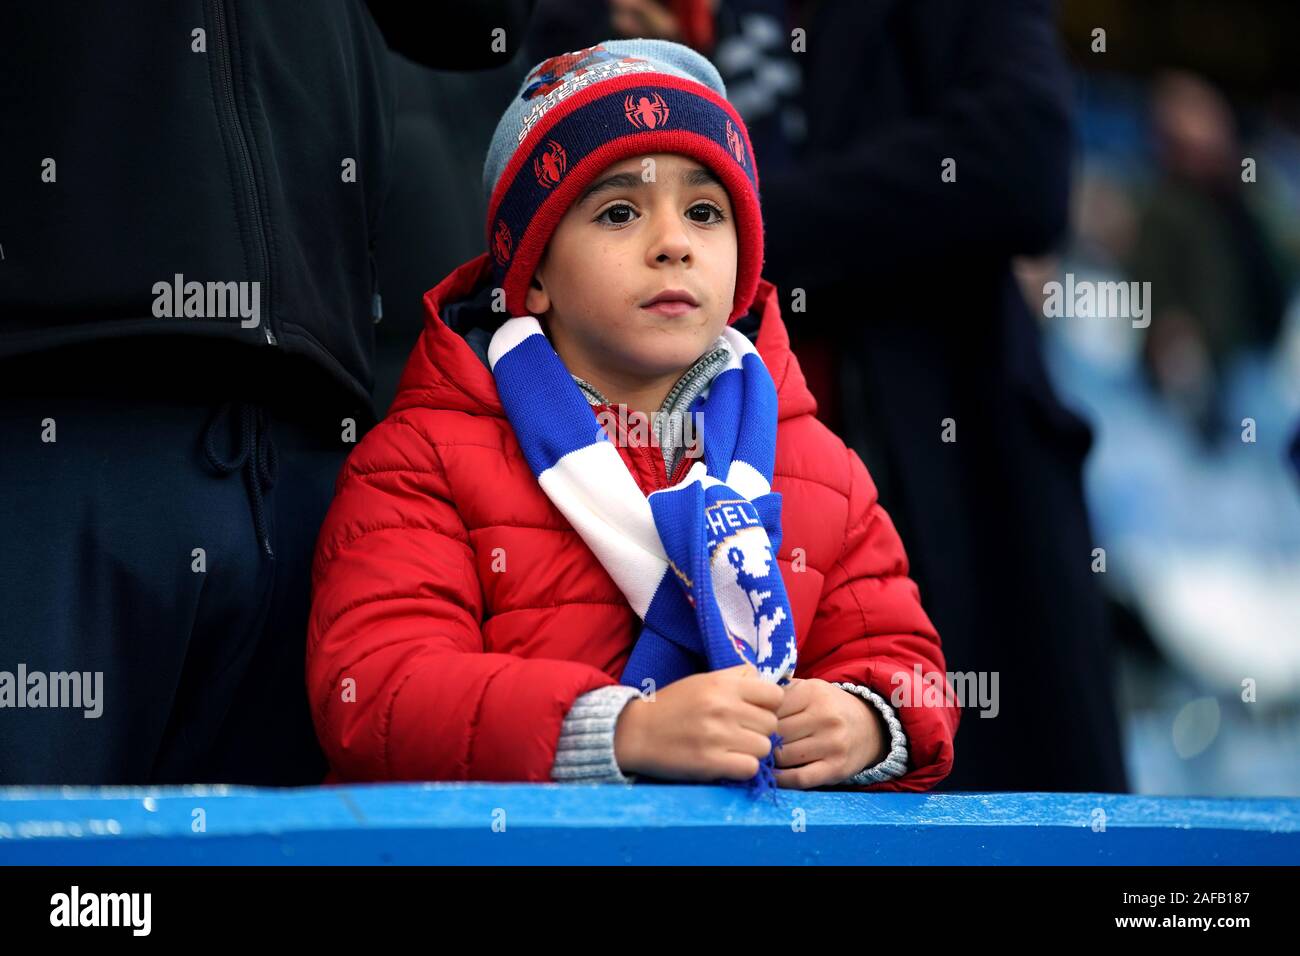 A young Chelsea fan in the stands during the Premier League match at Stamford Bridge, London. Stock Photo